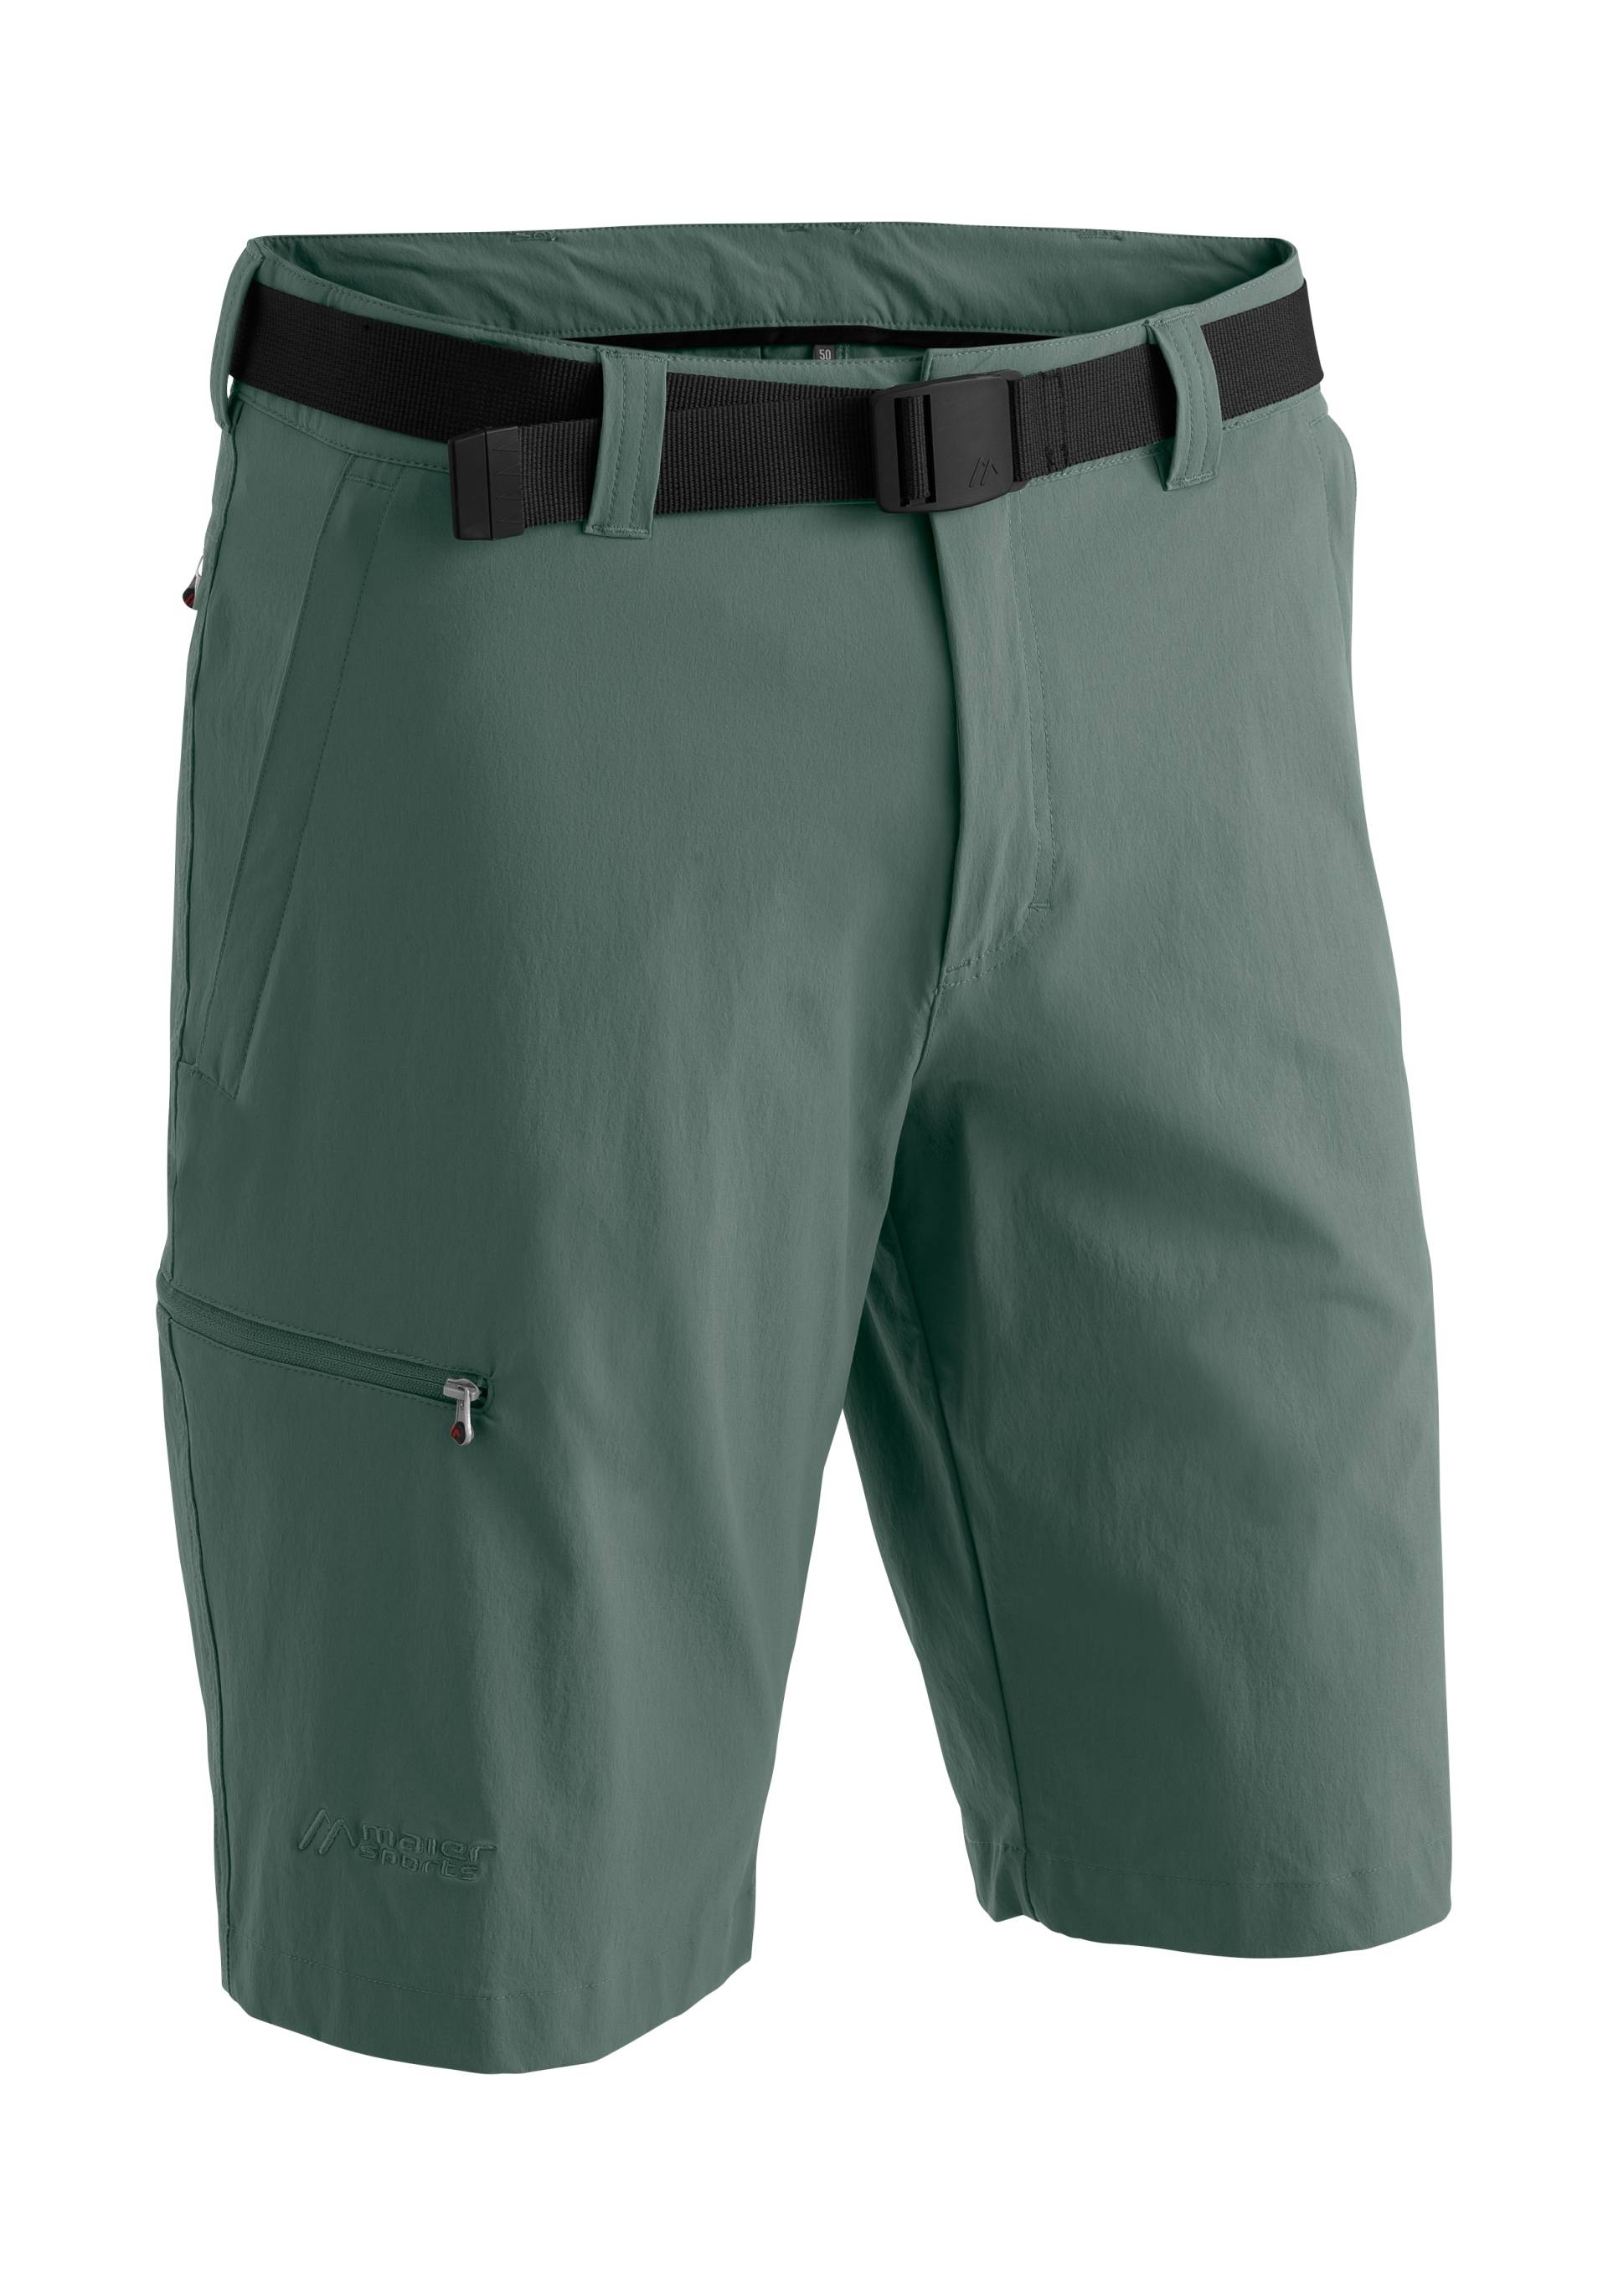 Maier Sports Funktionsshorts »Huang« von Maier Sports